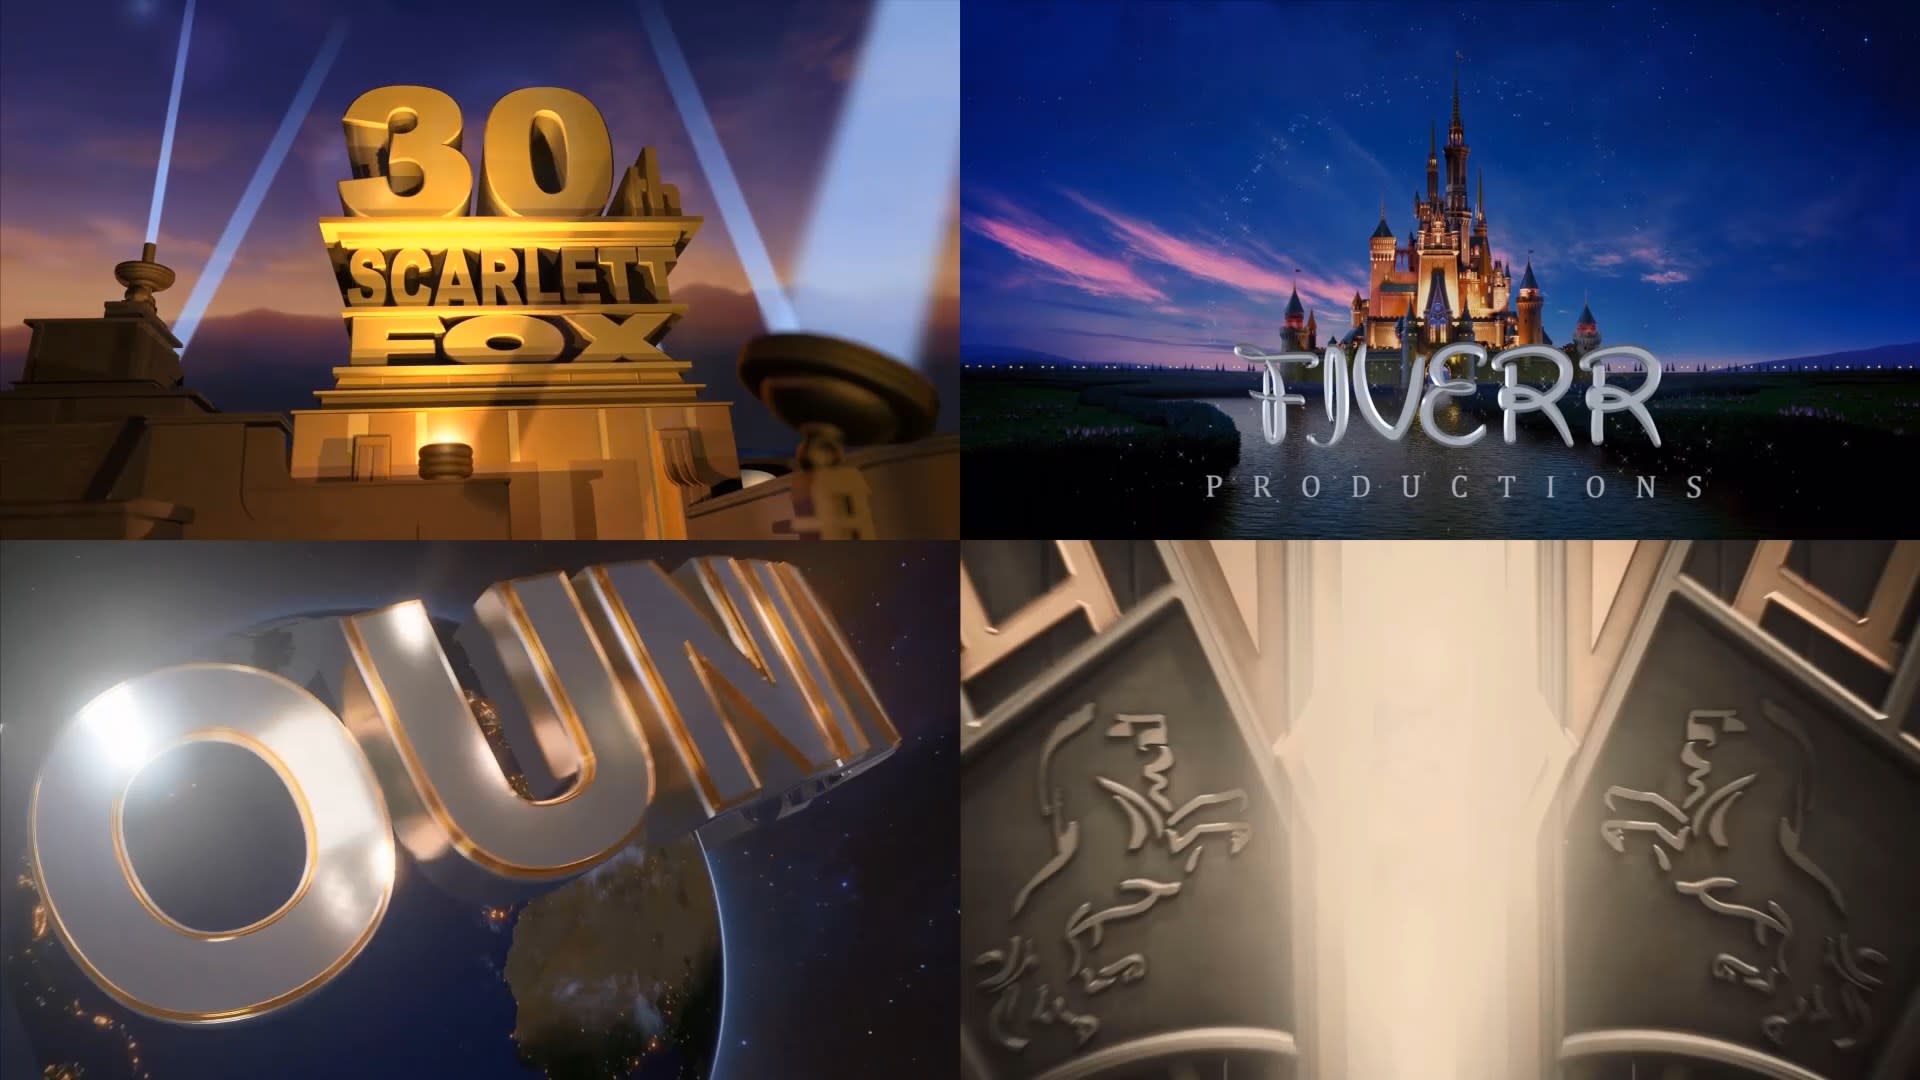 Create awesome movies intro,disney, 20th,lionsgat,universal by Walidbm |  Fiverr